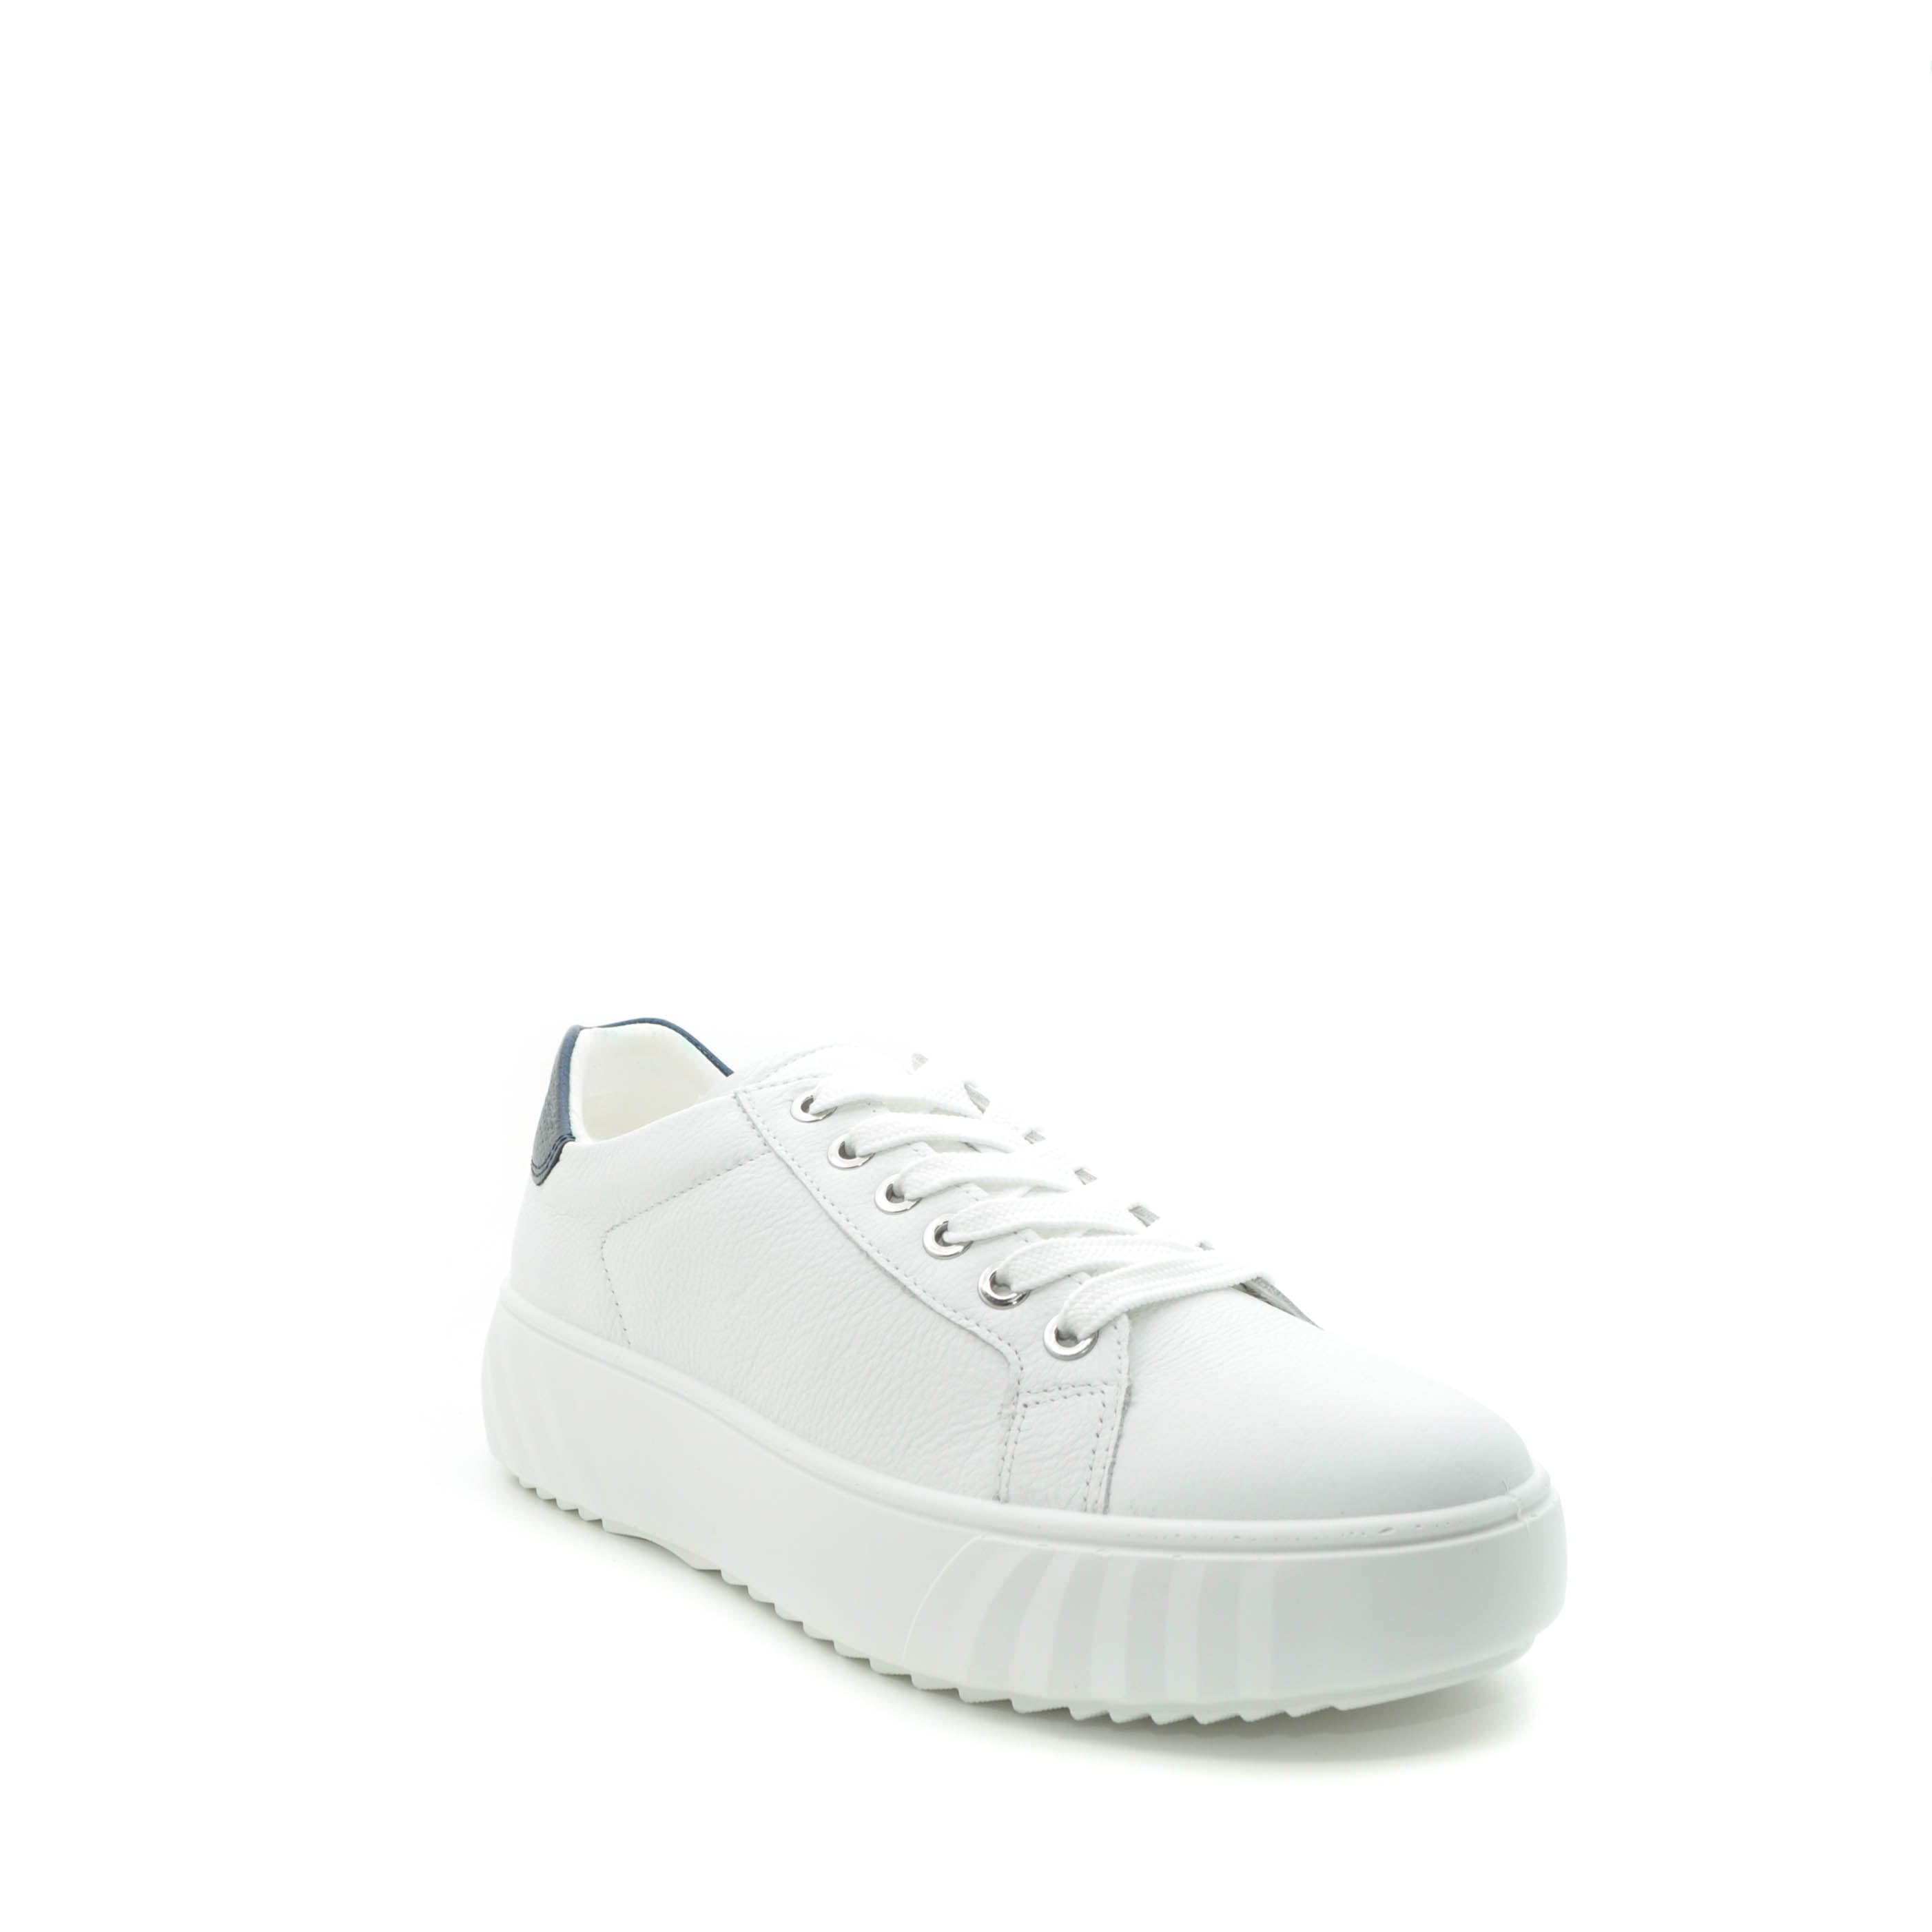 white wide fitting shoe